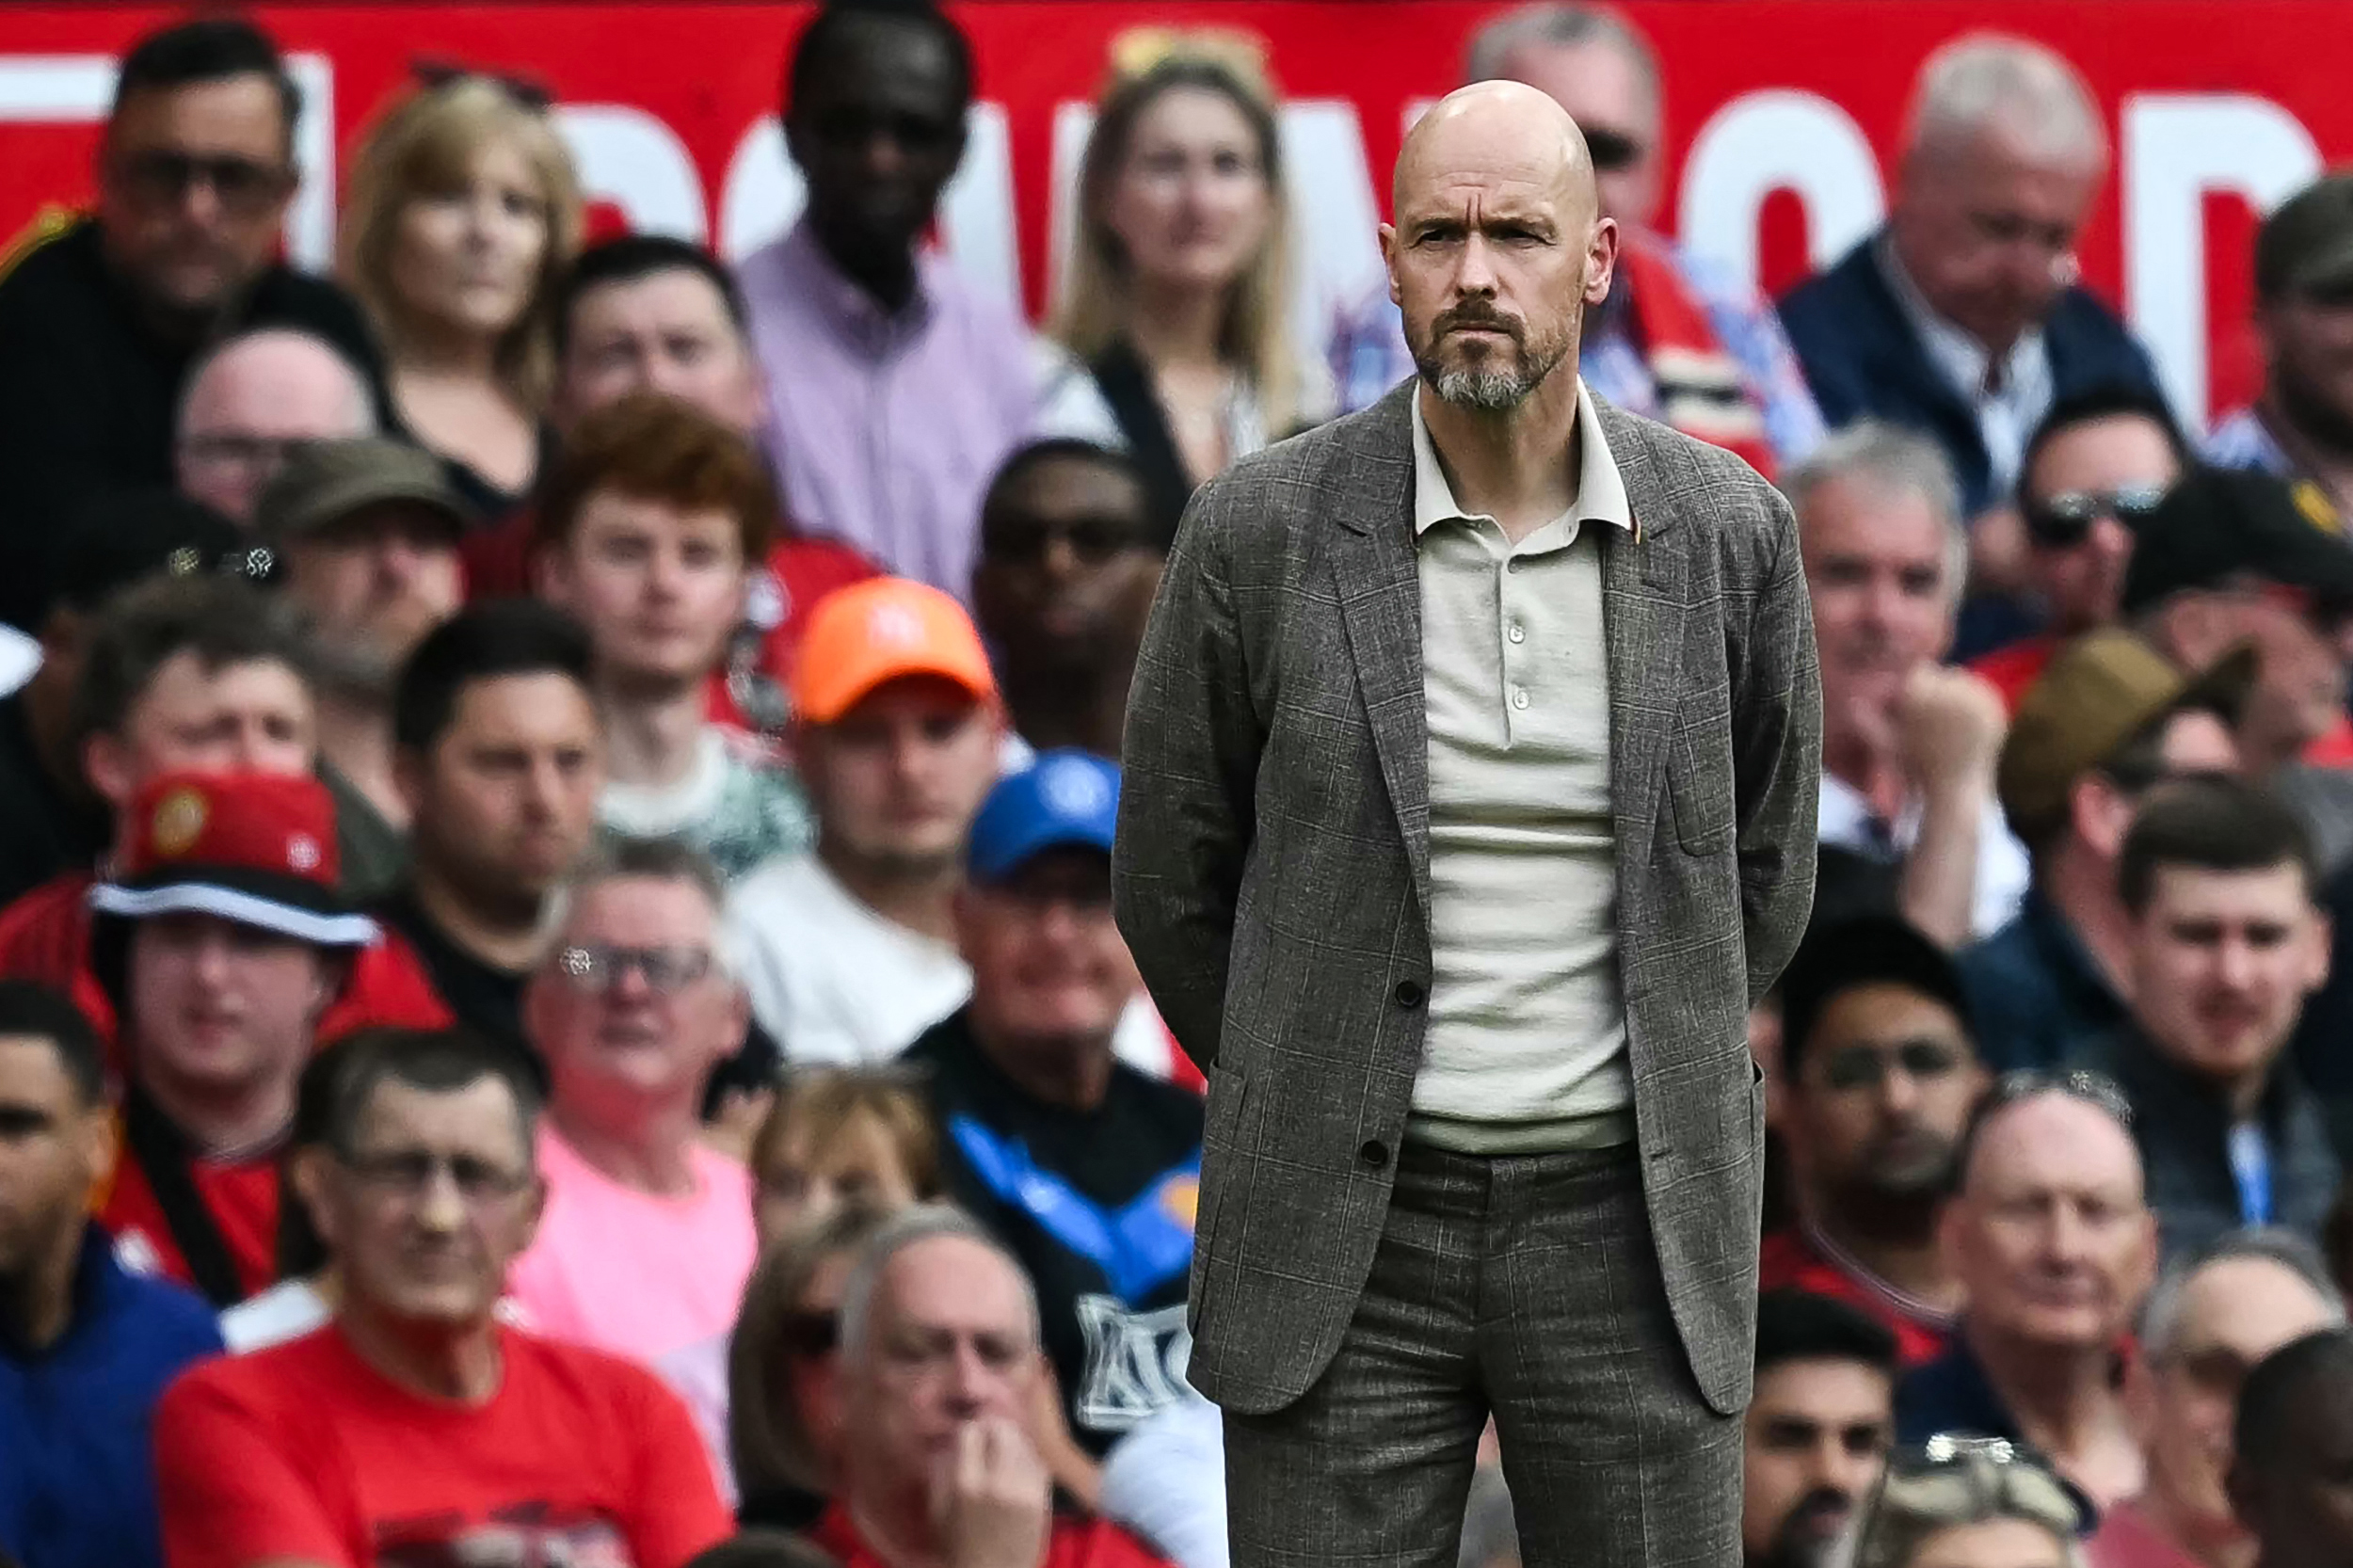 Manchester United manager, Erik ten Hag's upcoming clash against Newcastle United could be his last at Old Trafford